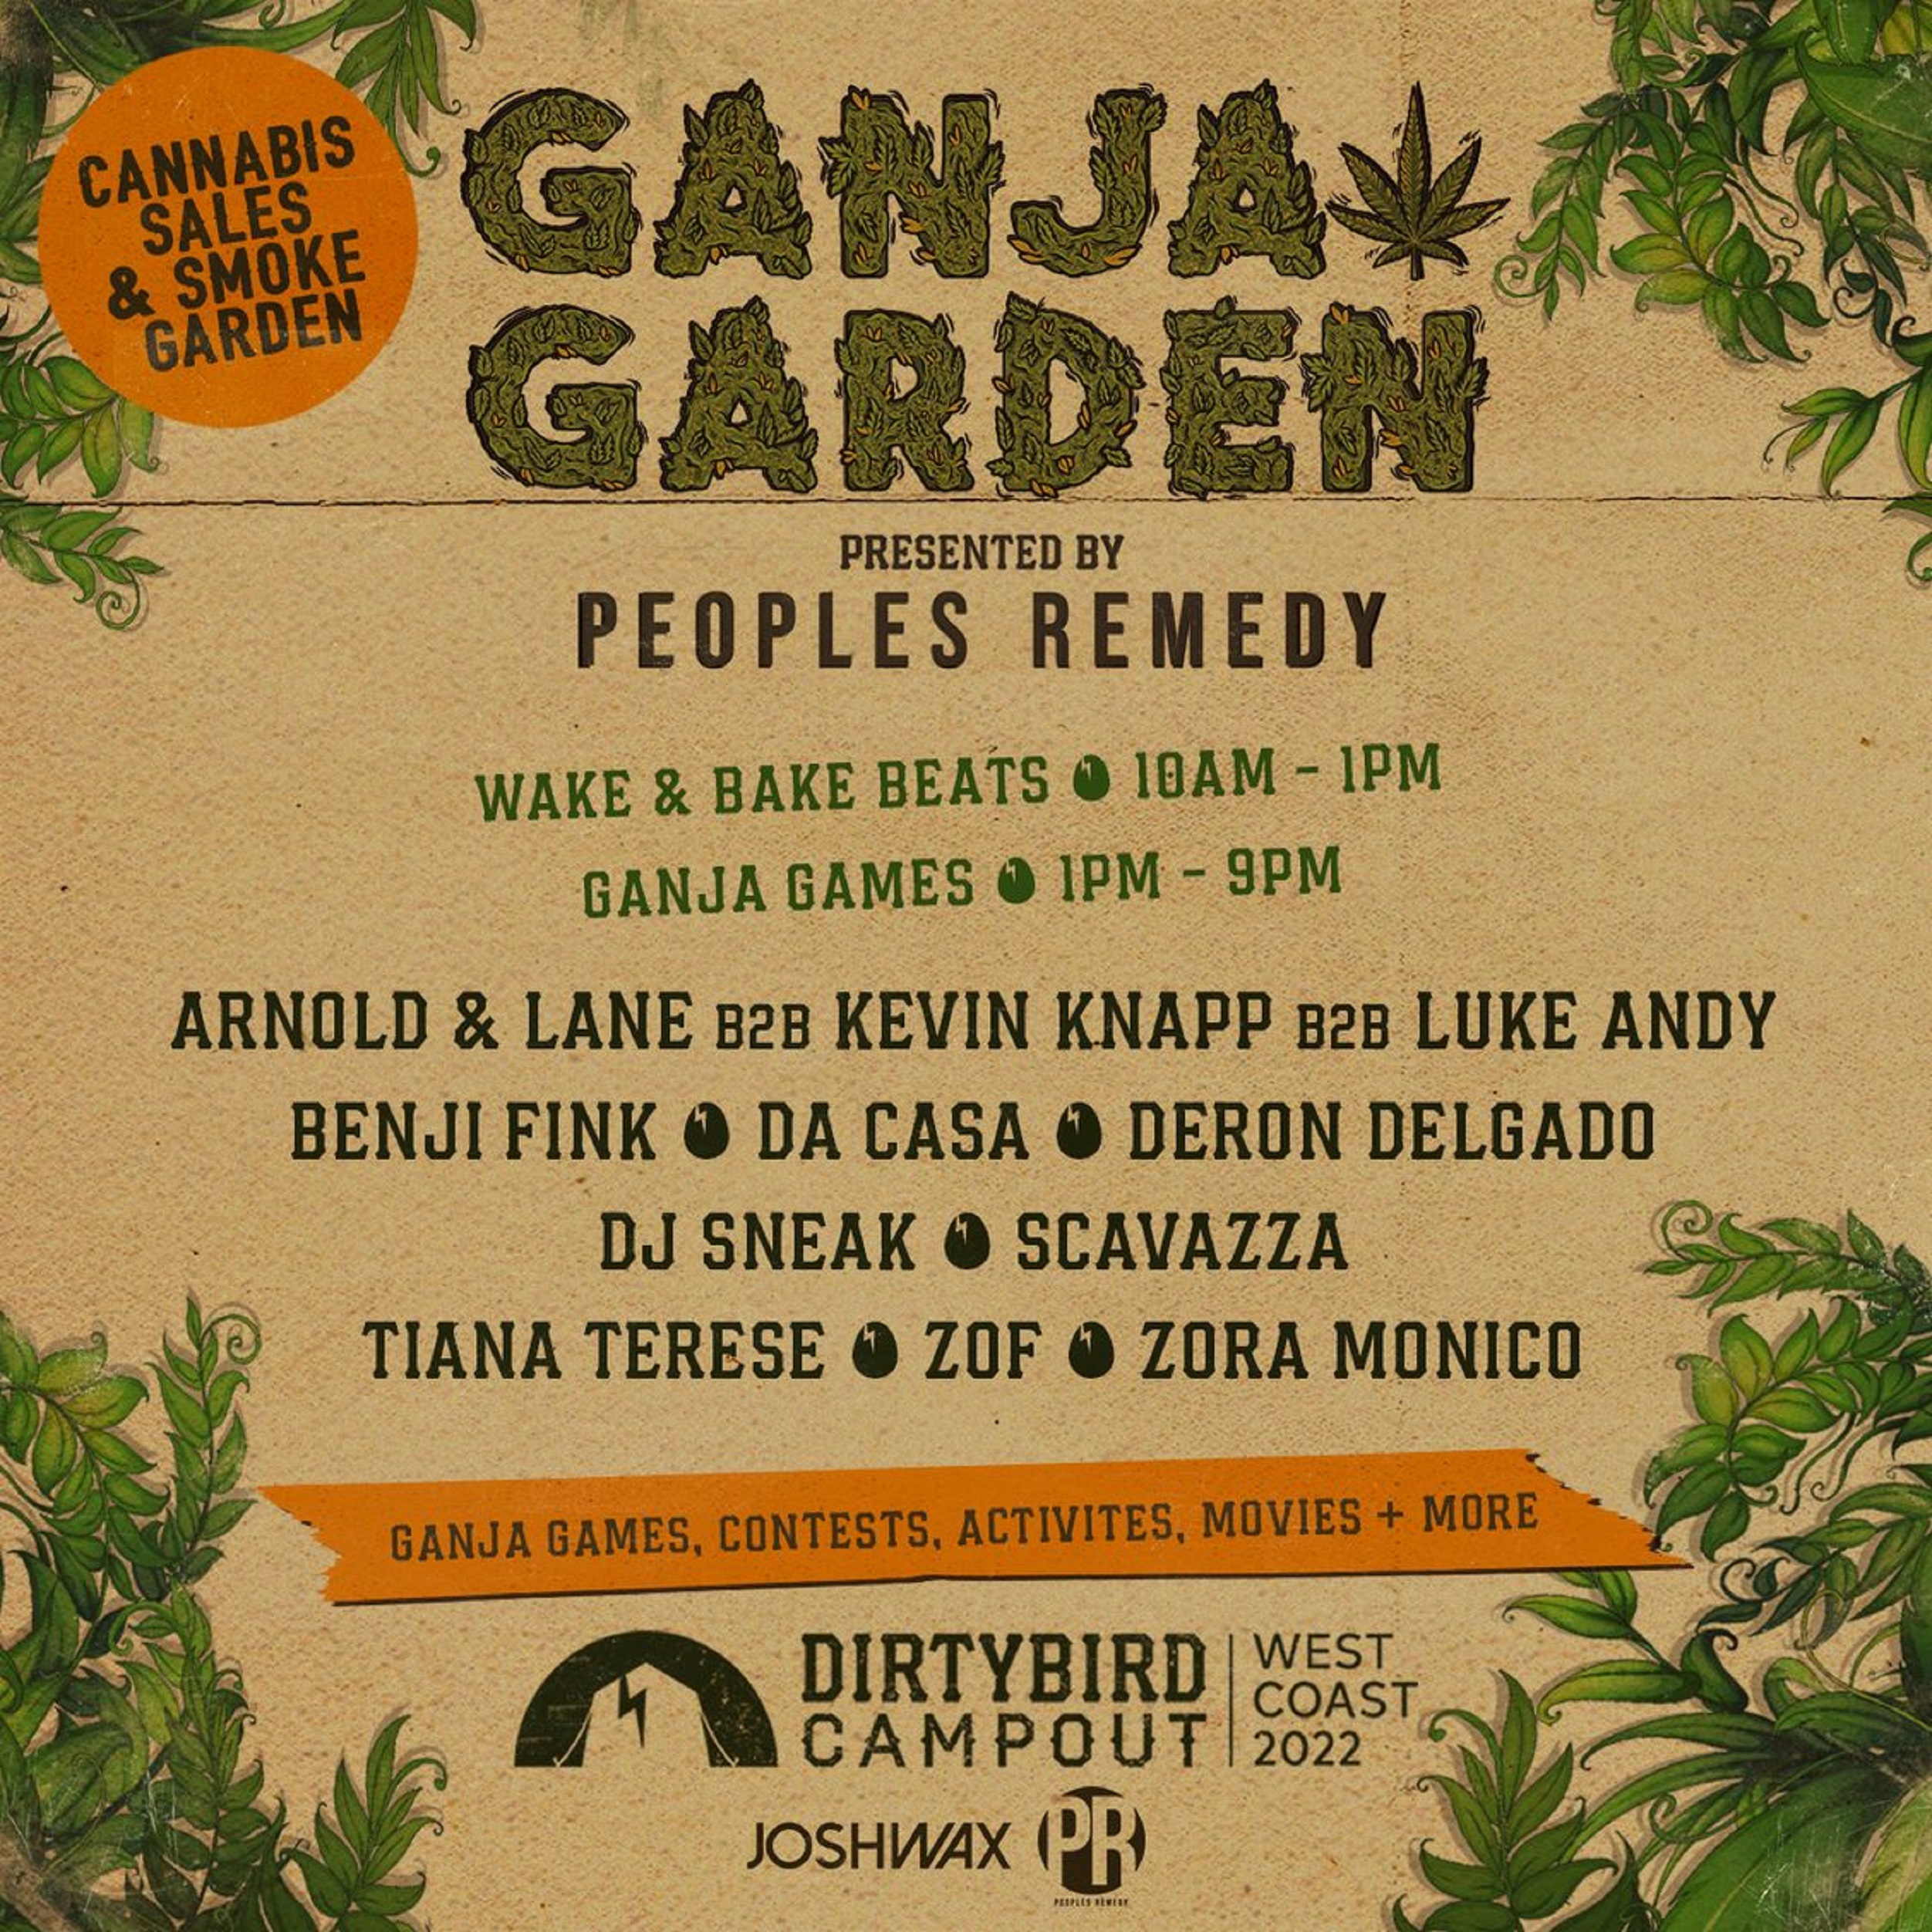 Dirtybird Campout Announces Debut ‘Ganja Garden Presented by People’s Remedy’